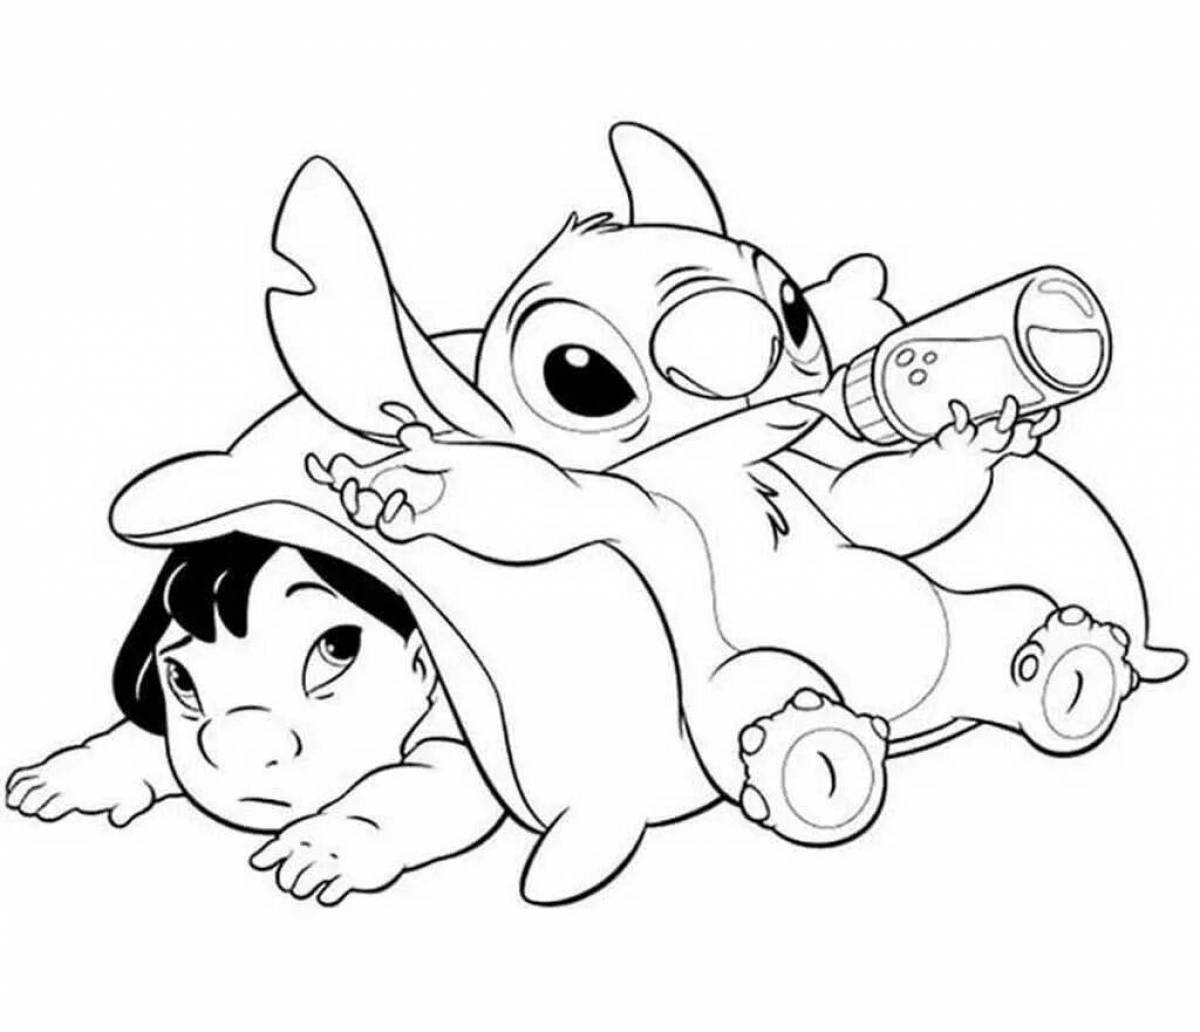 Coloring book awesome cartoon character